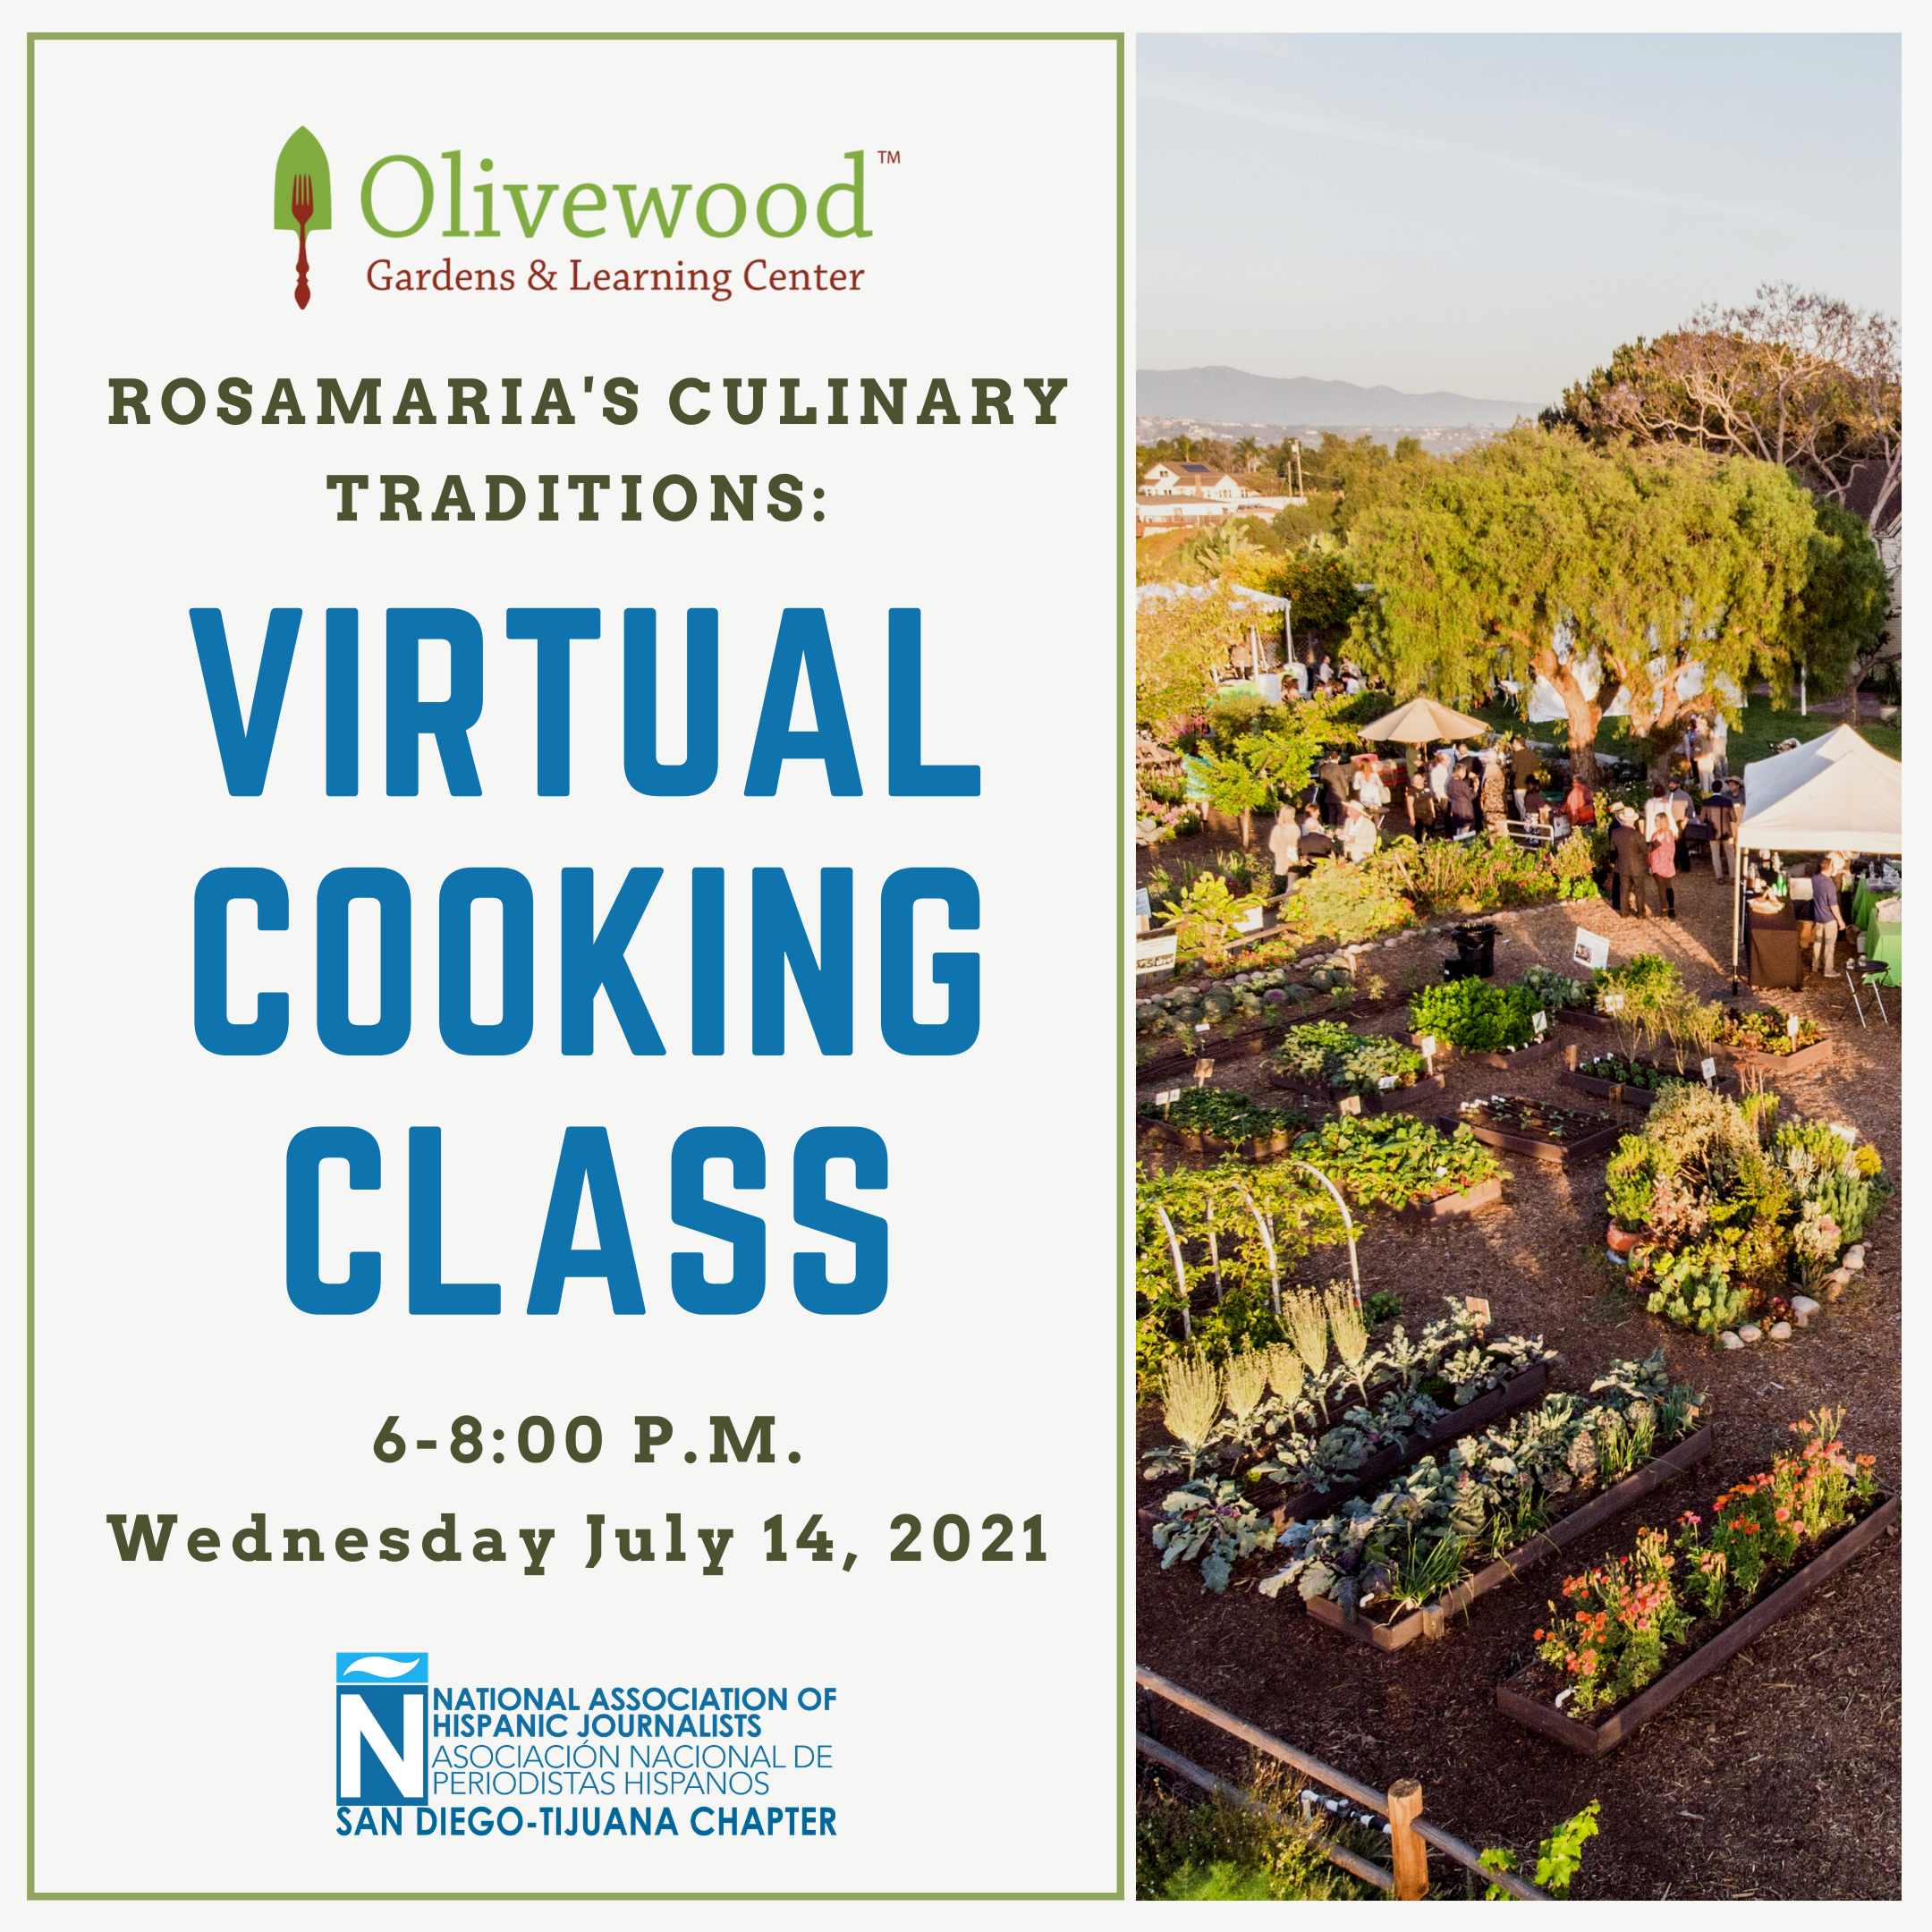 Rosamaria’s Culinary Traditions: Virtual Cooking Class